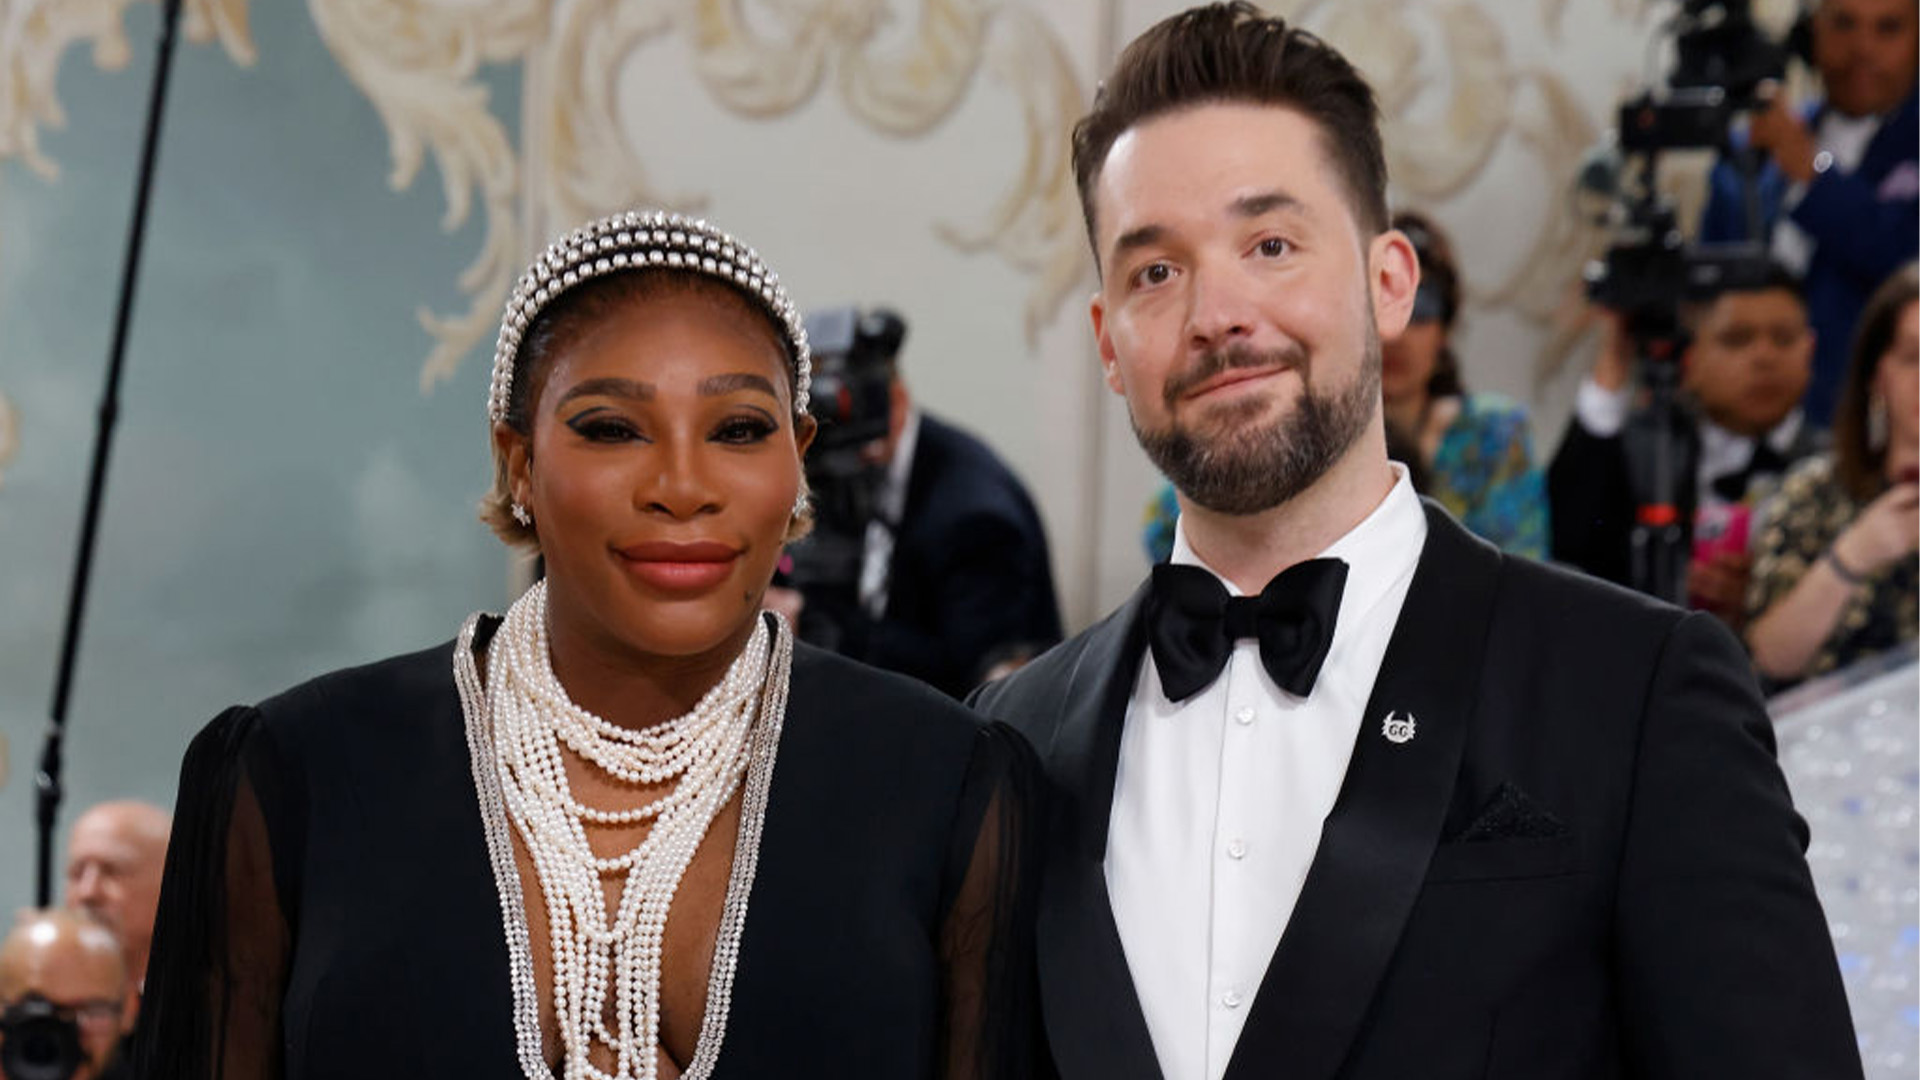 Serena Williams' Newborn Daughter Becomes The Youngest Owner Of 2 Professional Sports Teams, And She's Barely One Year Old